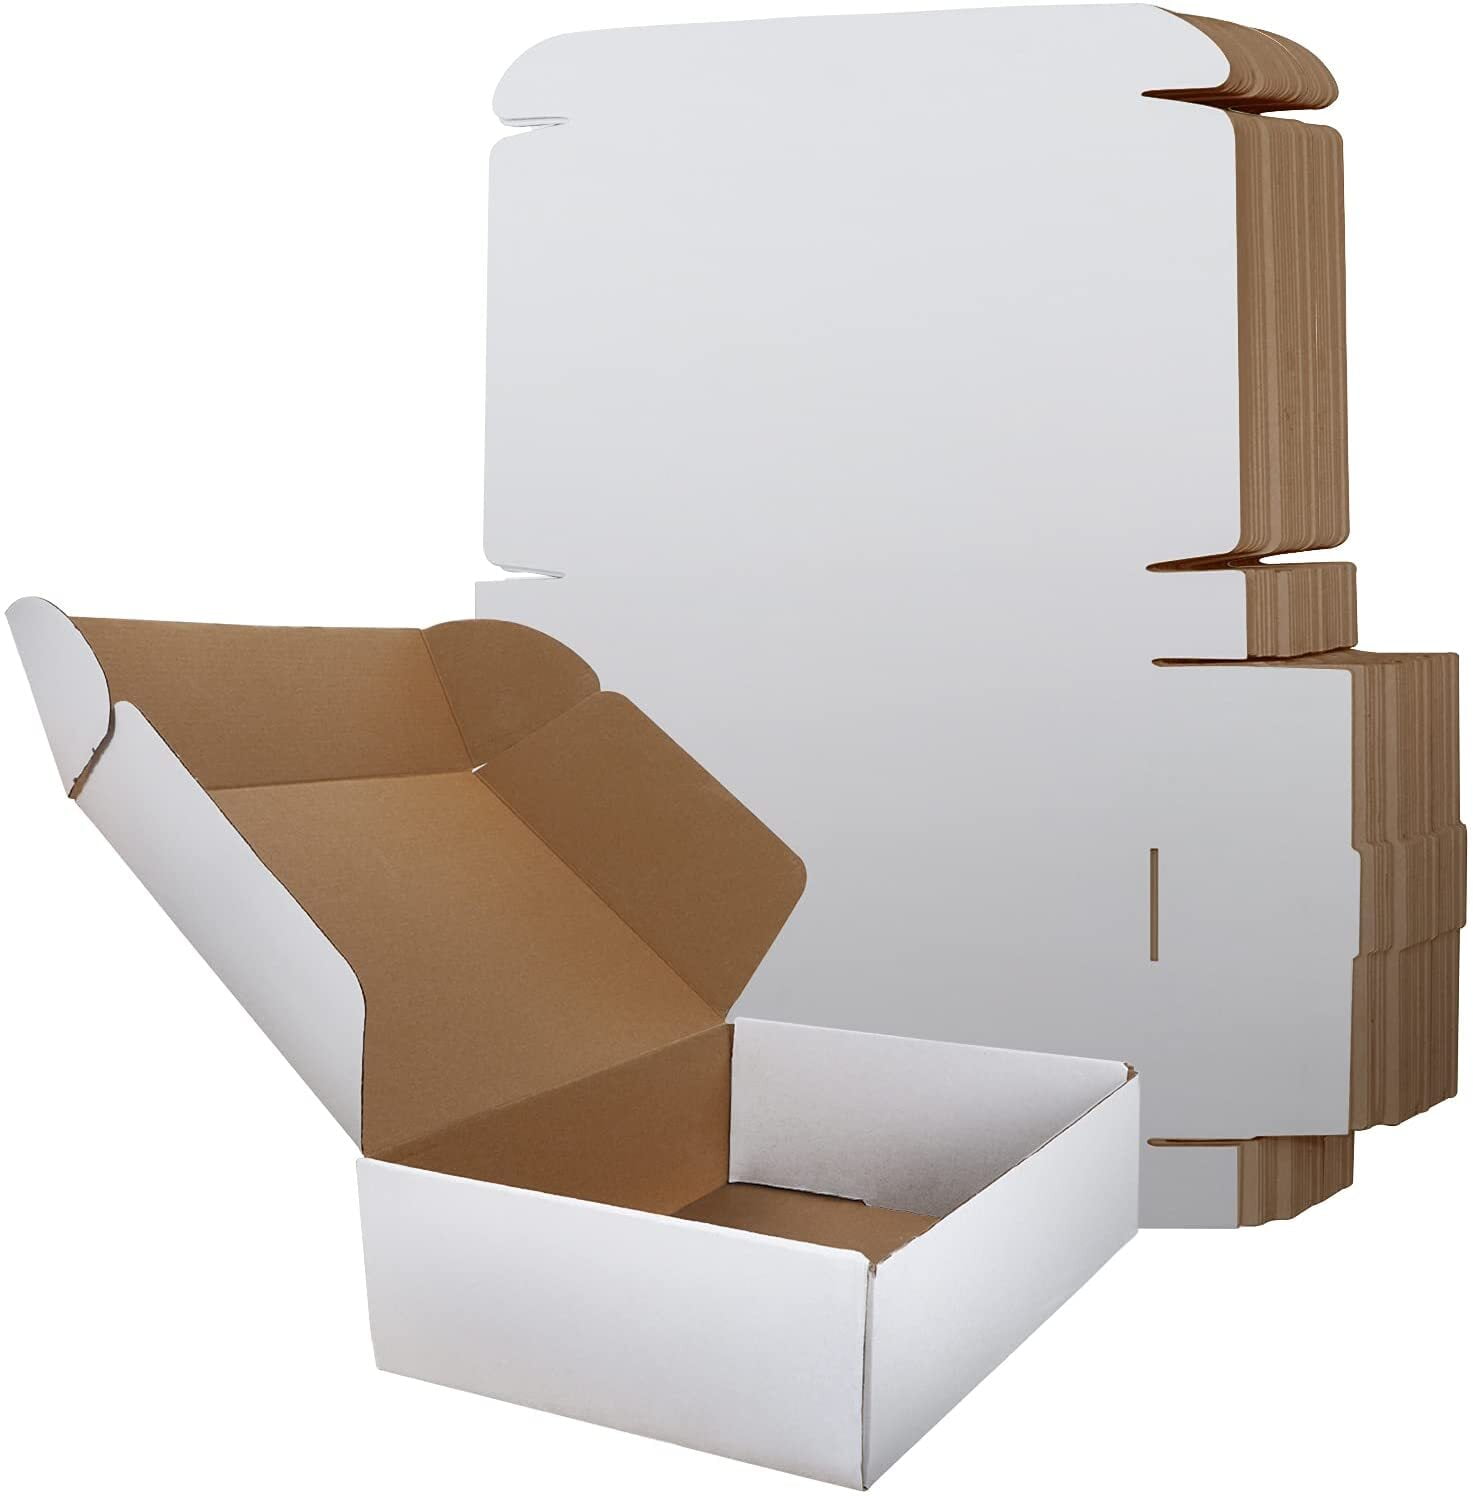 20 x 11 3/8 x 5 1/2 White 10/Bundle Corrugated Carrying Cases 